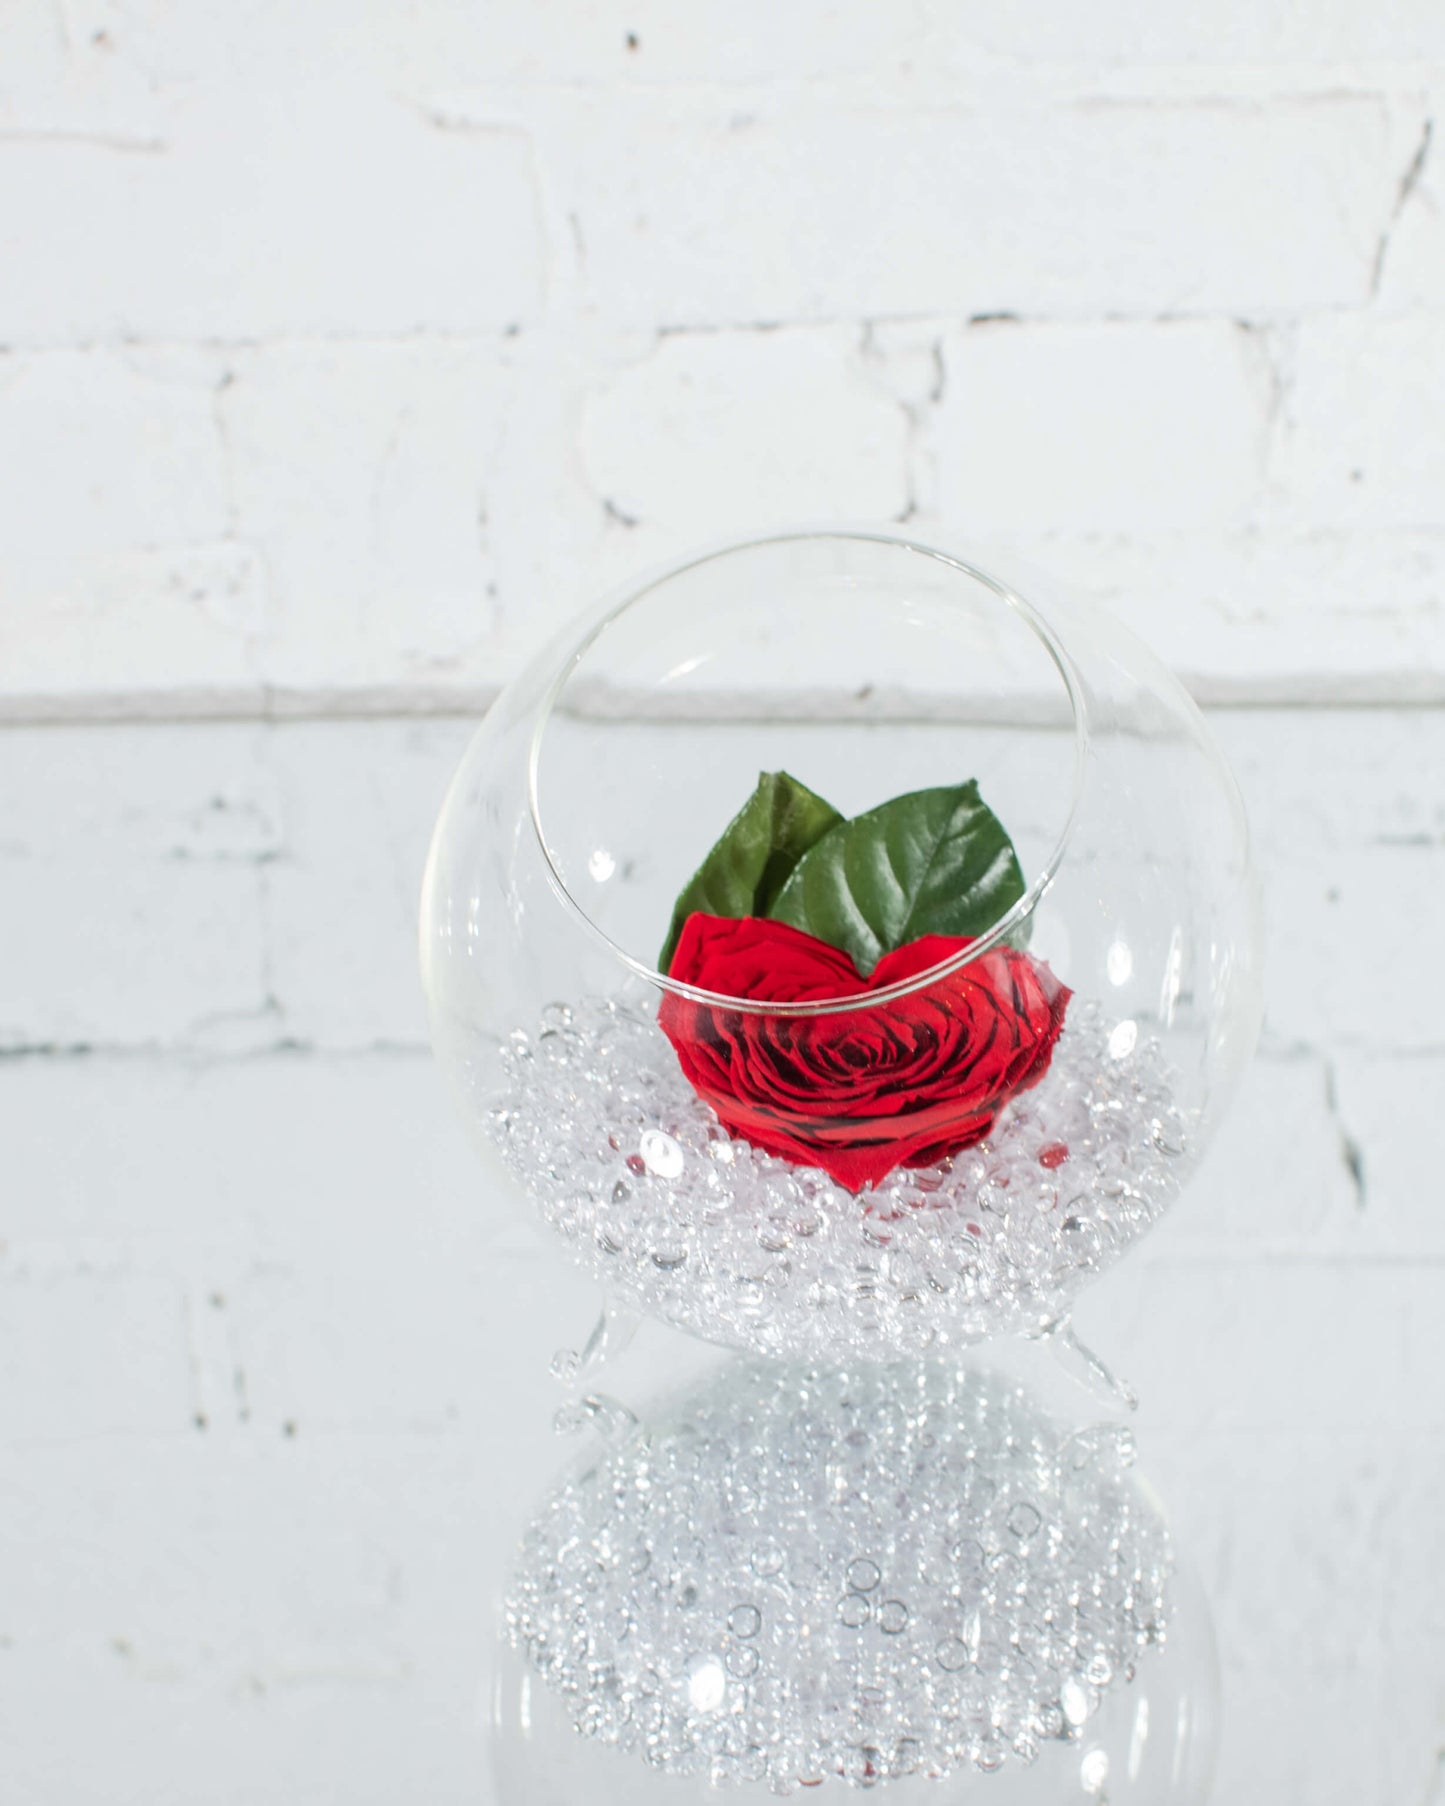 PETITE GLASS FISHBOWL VASE WITH HEART-SHAPED PRESERVED RED ROSE